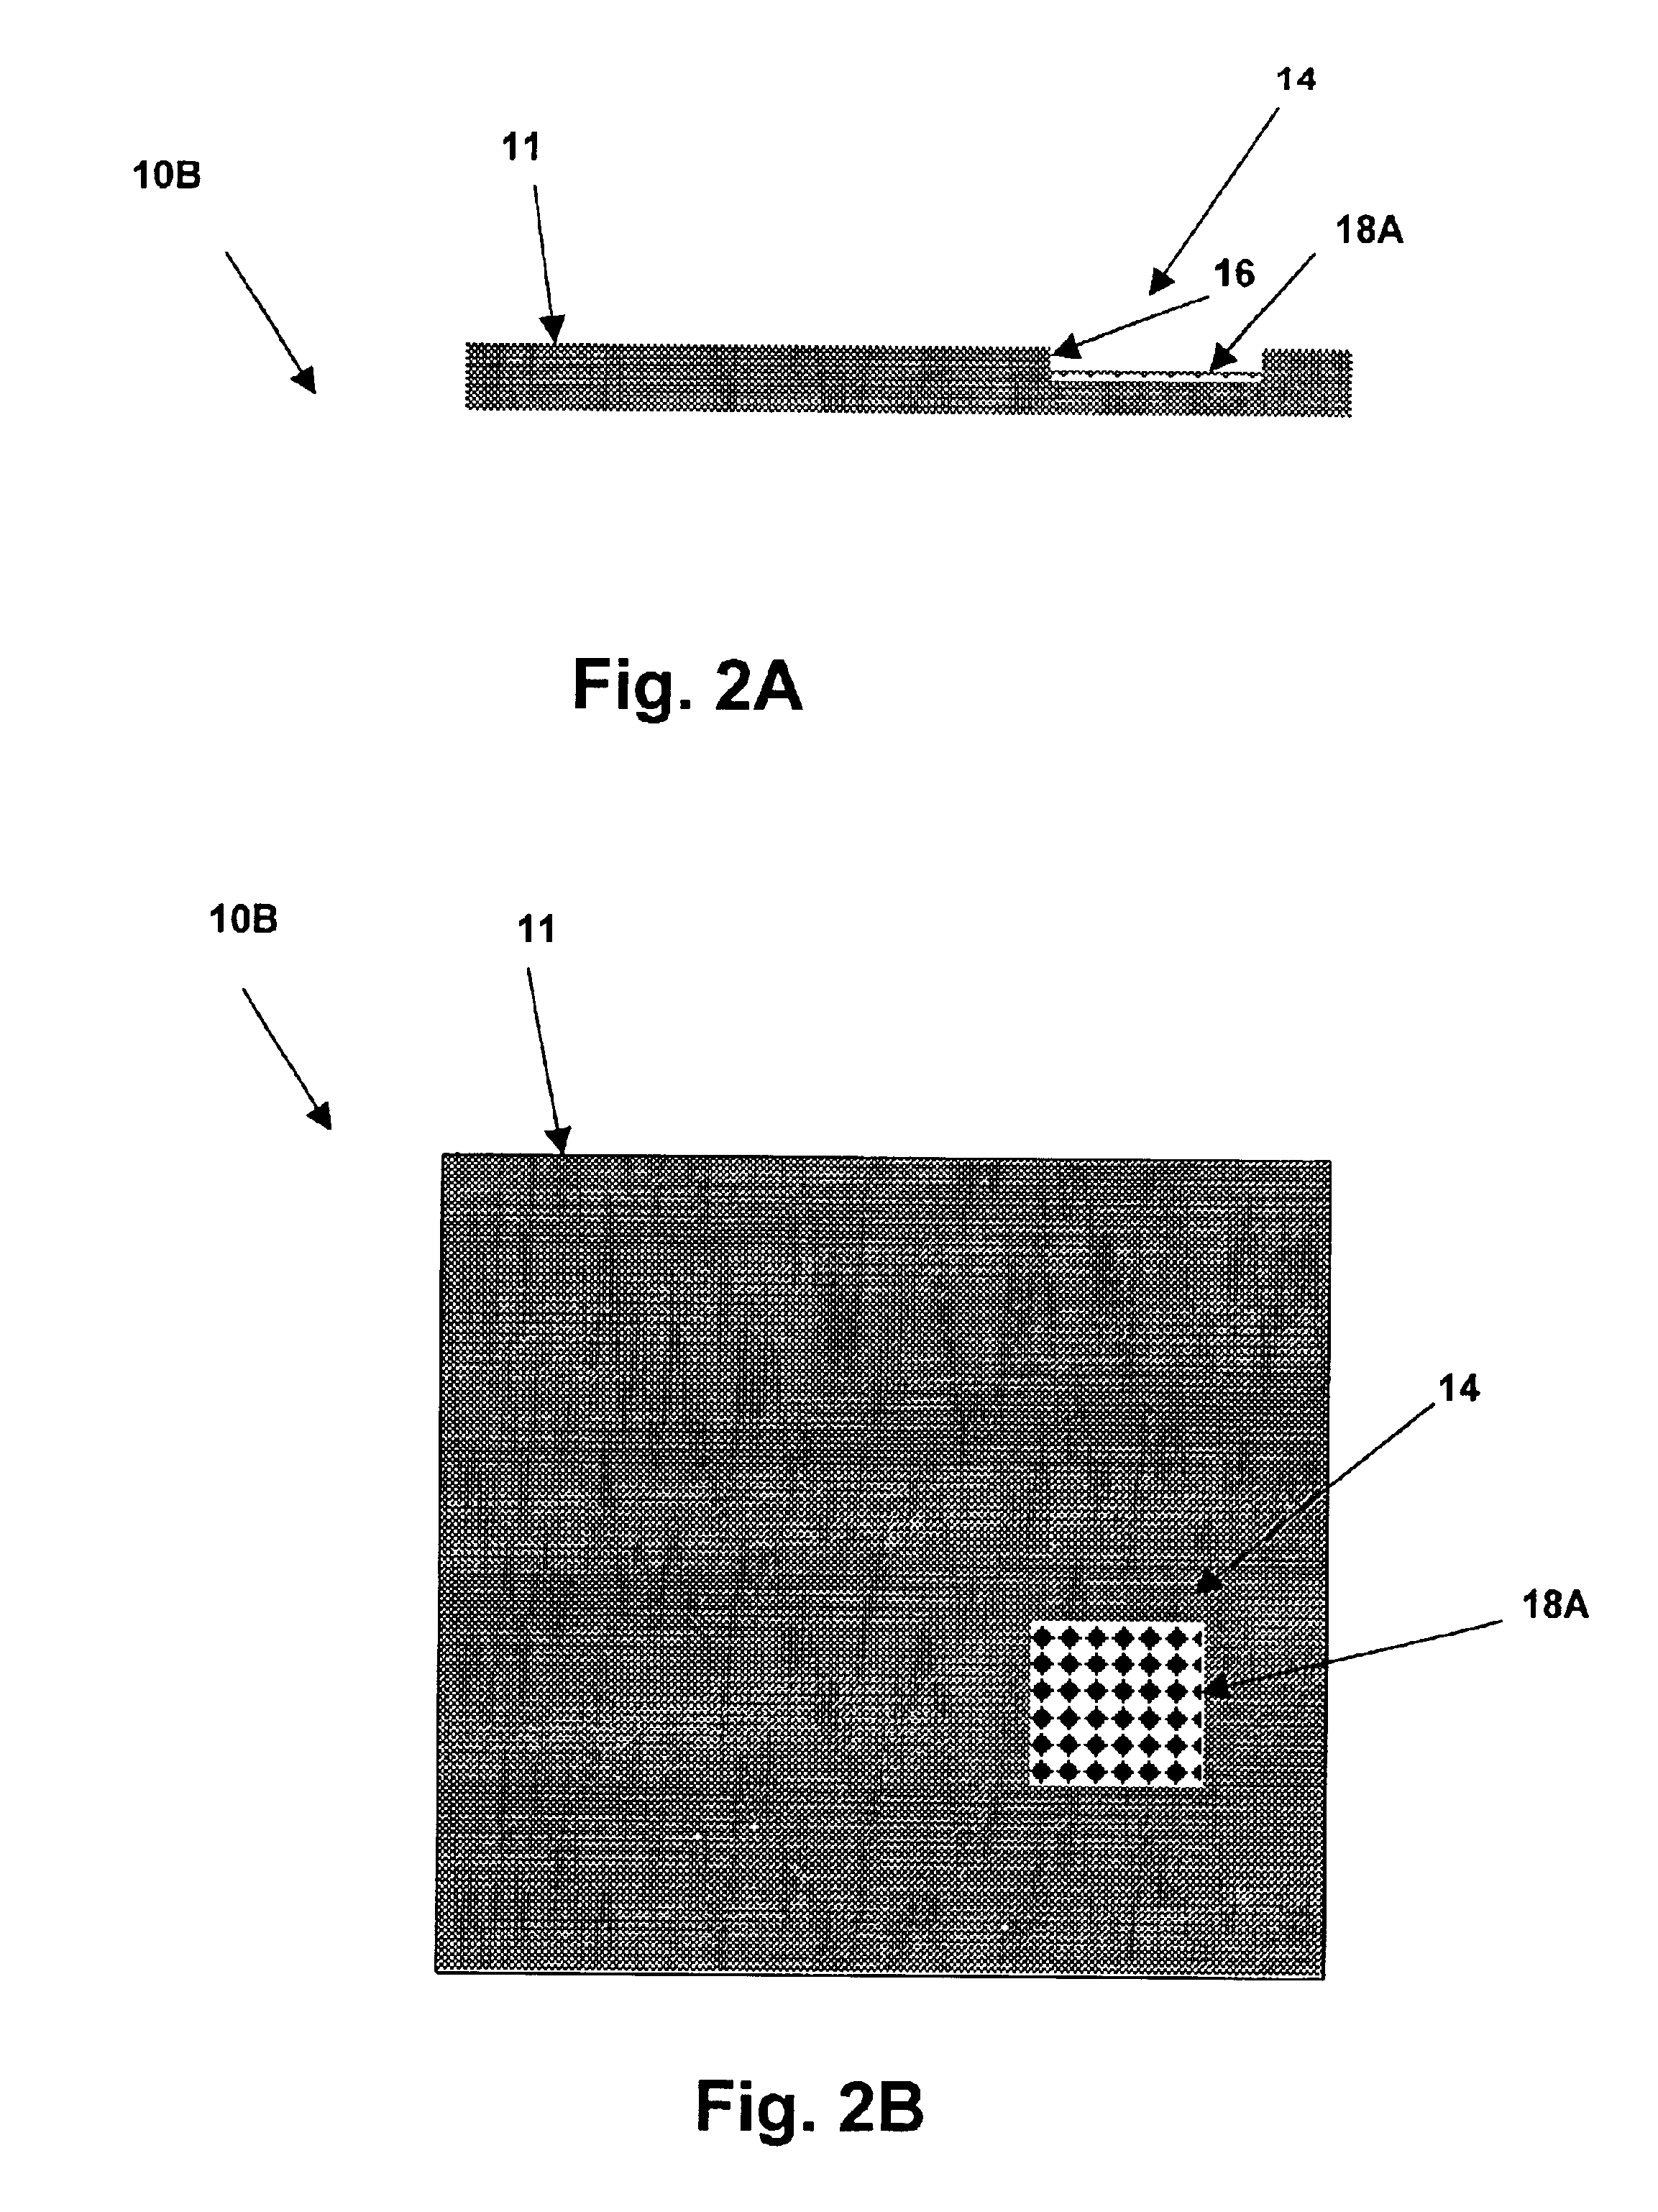 Integrated circuit substrate having embedded passive components and methods therefor